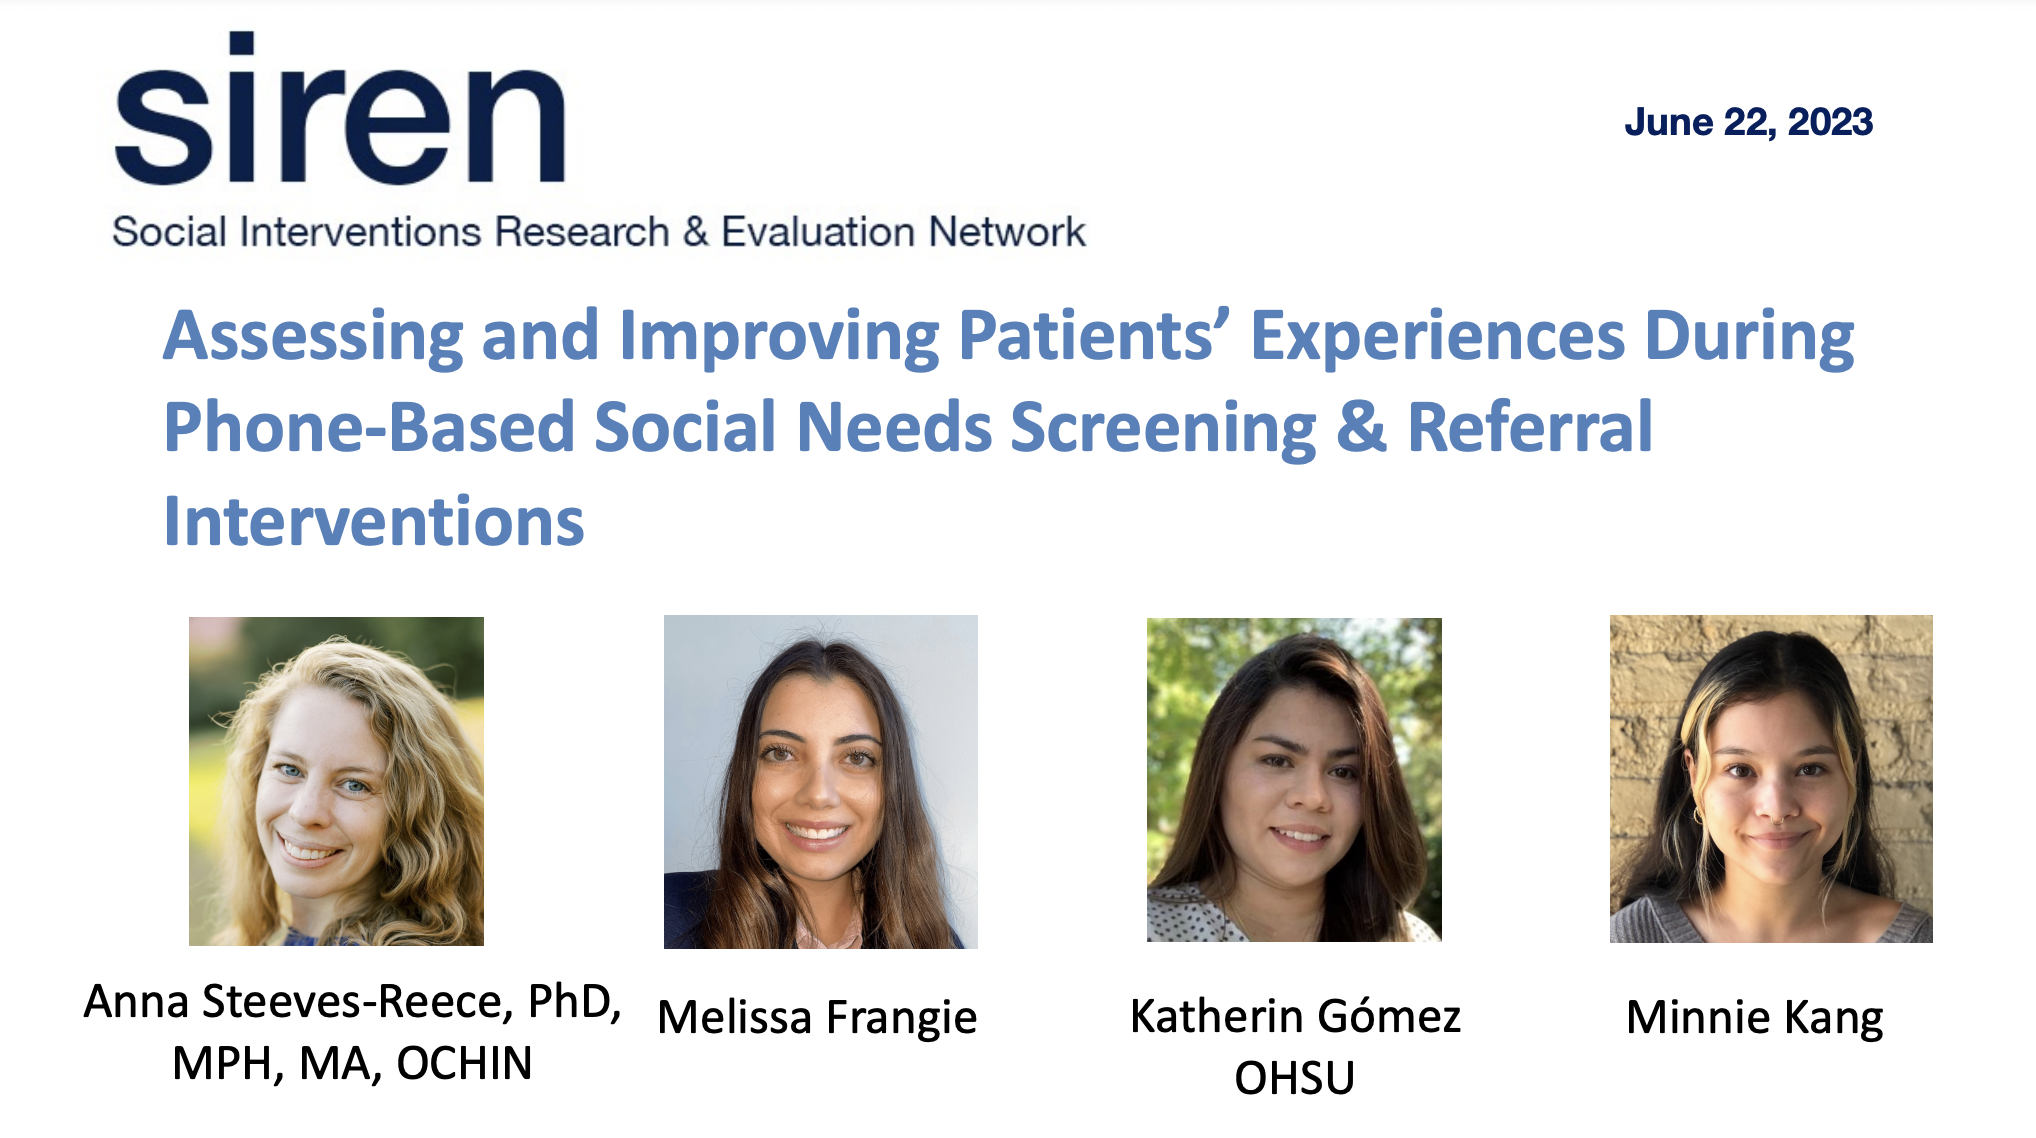 Assessing and Improving Patients’ Experiences During Phone-Based Social Needs Screening & Referral Interventions